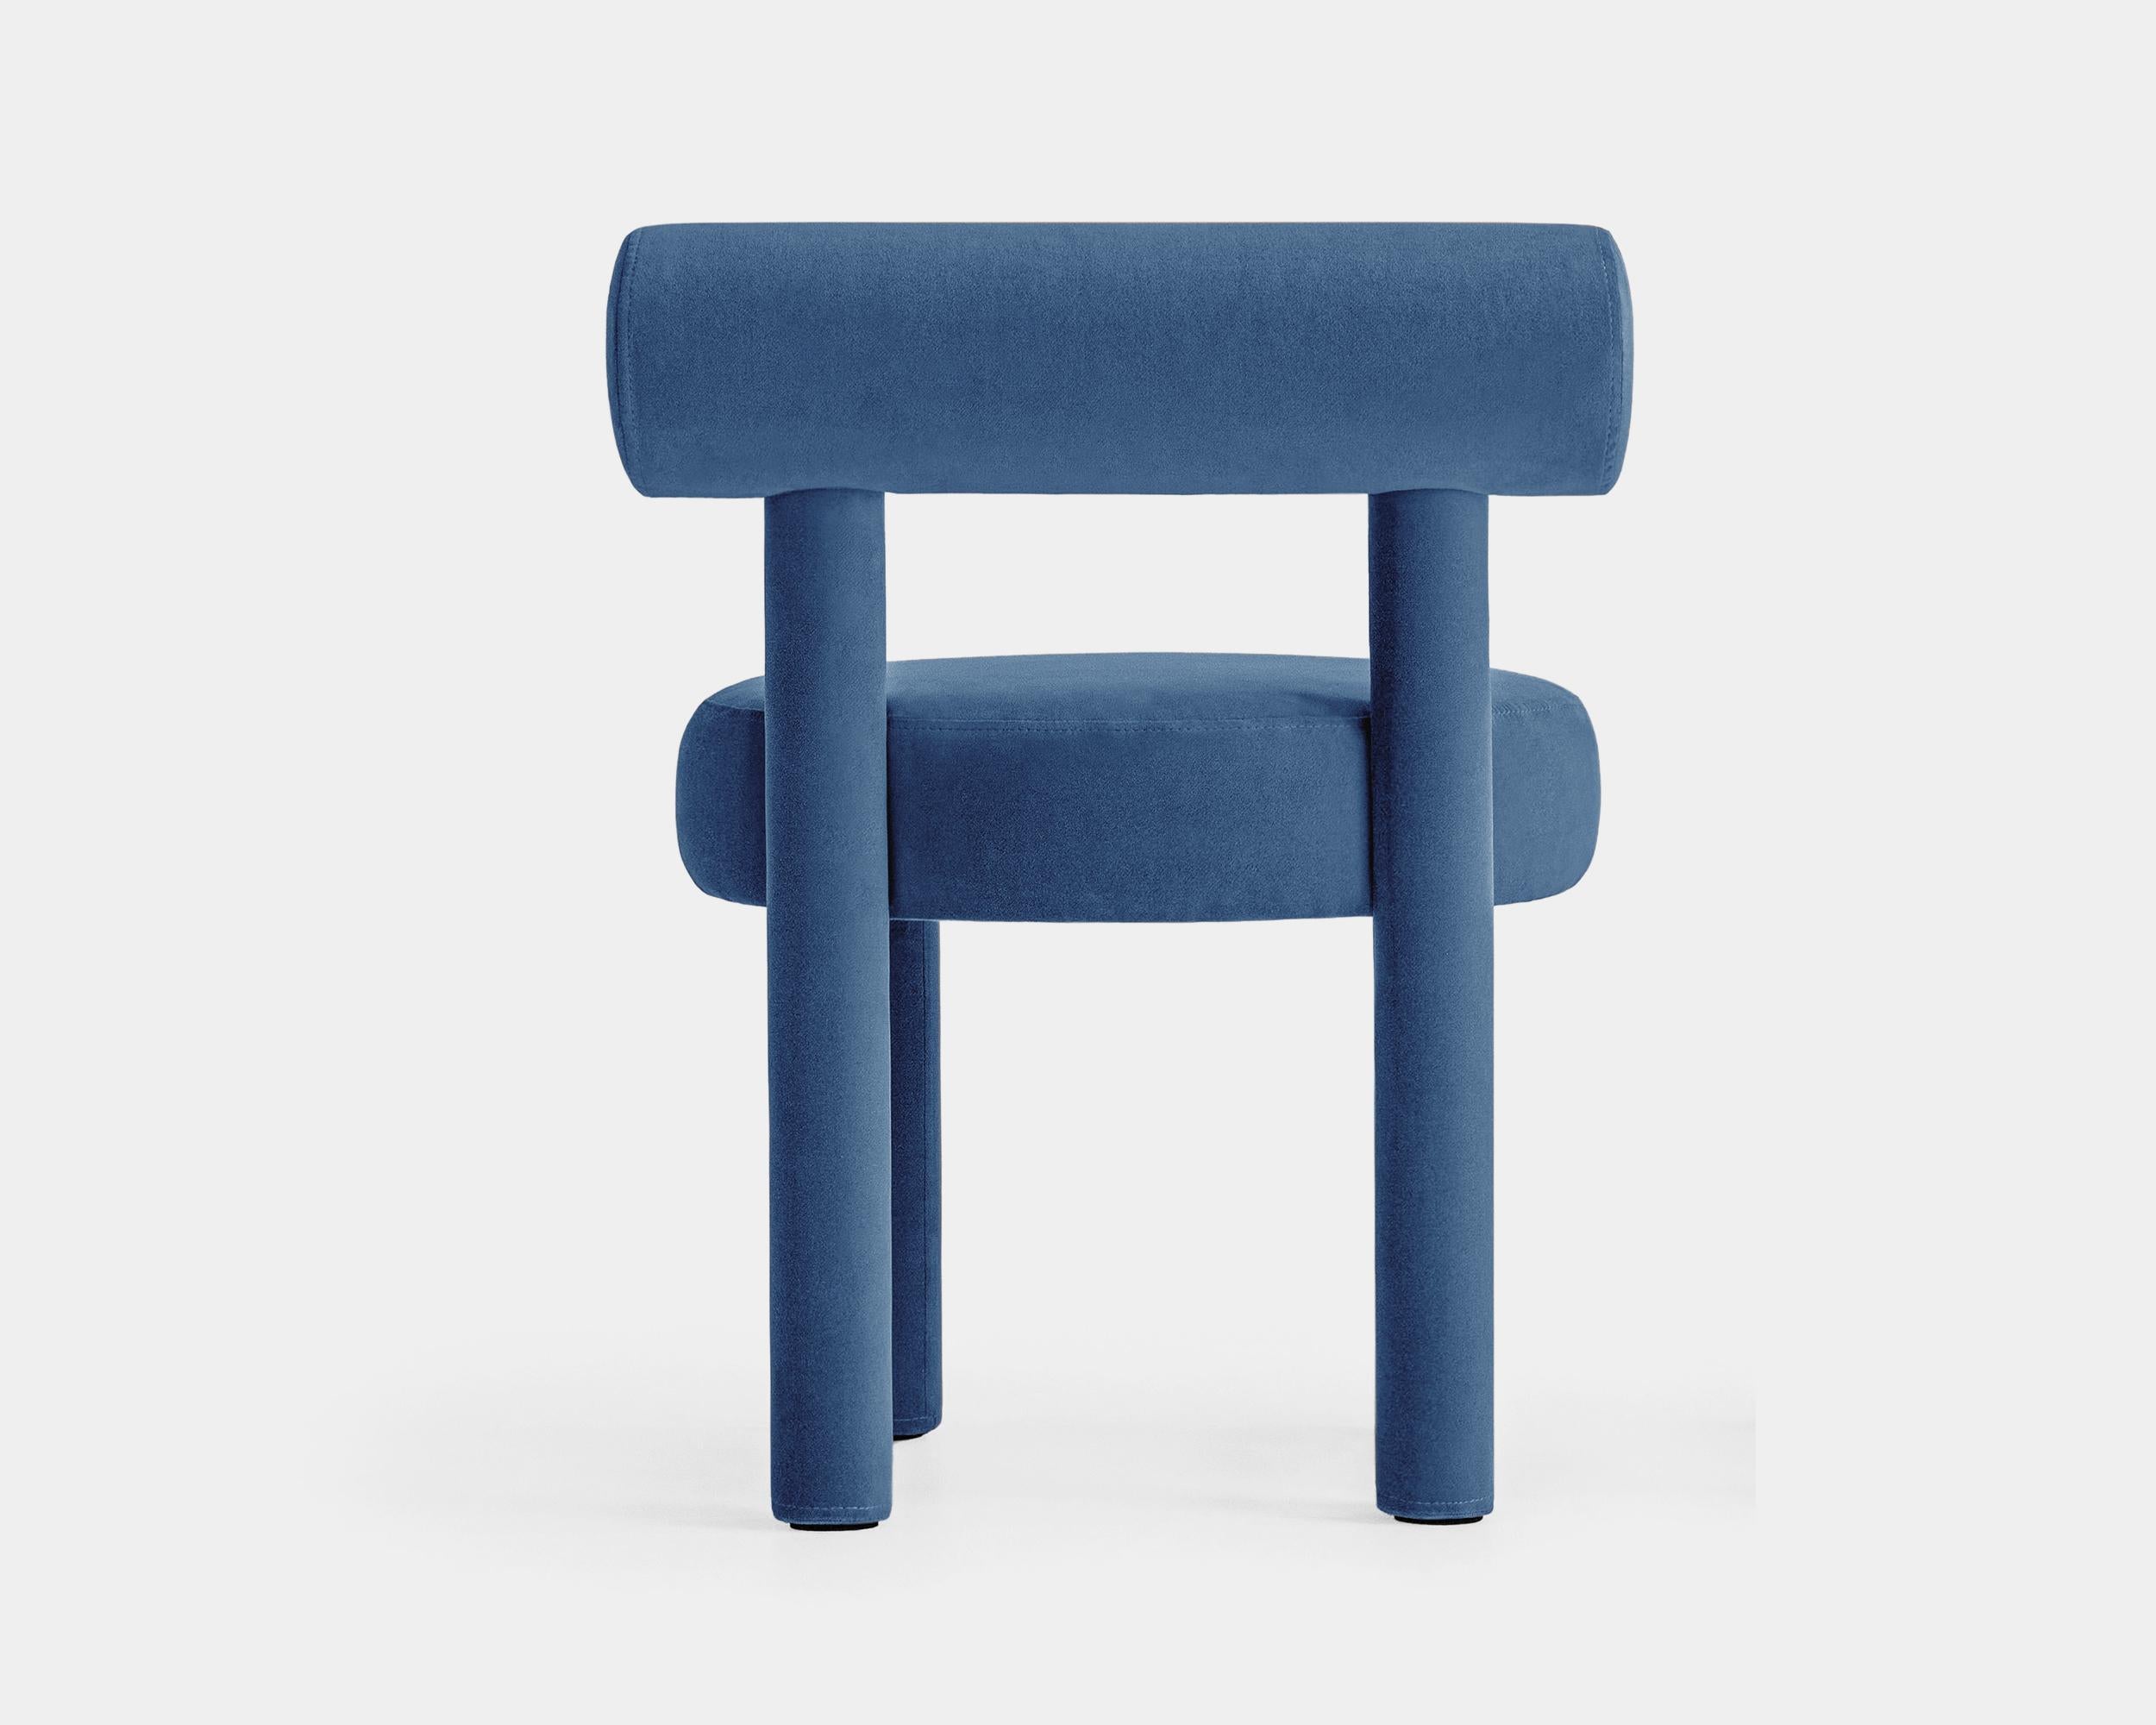 Chair Gropius CS1
Designer: Kateryna Sokolova

Model in the main picture : Collection - Magic velvet, Color - Blue 2233

Dimensions:
Height: 74 cm / 29,13 in
Width: 57 cm / 22,44 in
Depth: 57 cm / 22,44 in
Seat height: 47 cm / 18,11 in

New NOOM